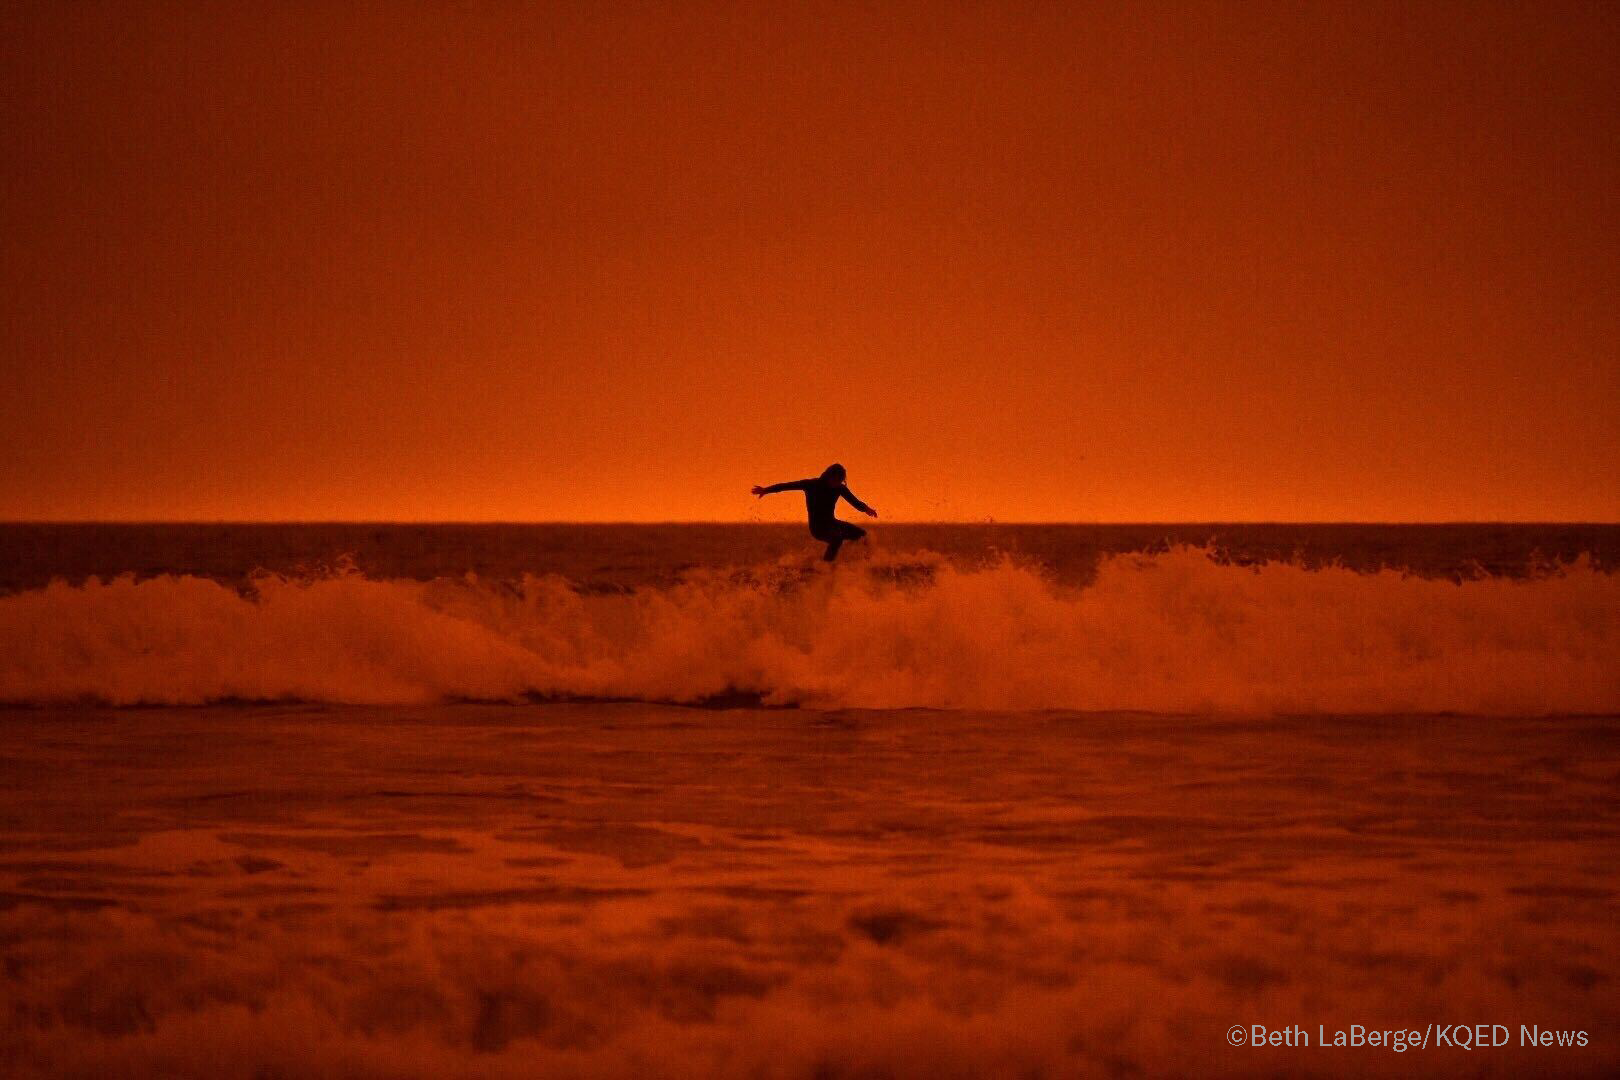 A surfer rides the waves of Ocean Beach in San Francisco under smoke-filled orange skies, on Sept. 9, 2020.